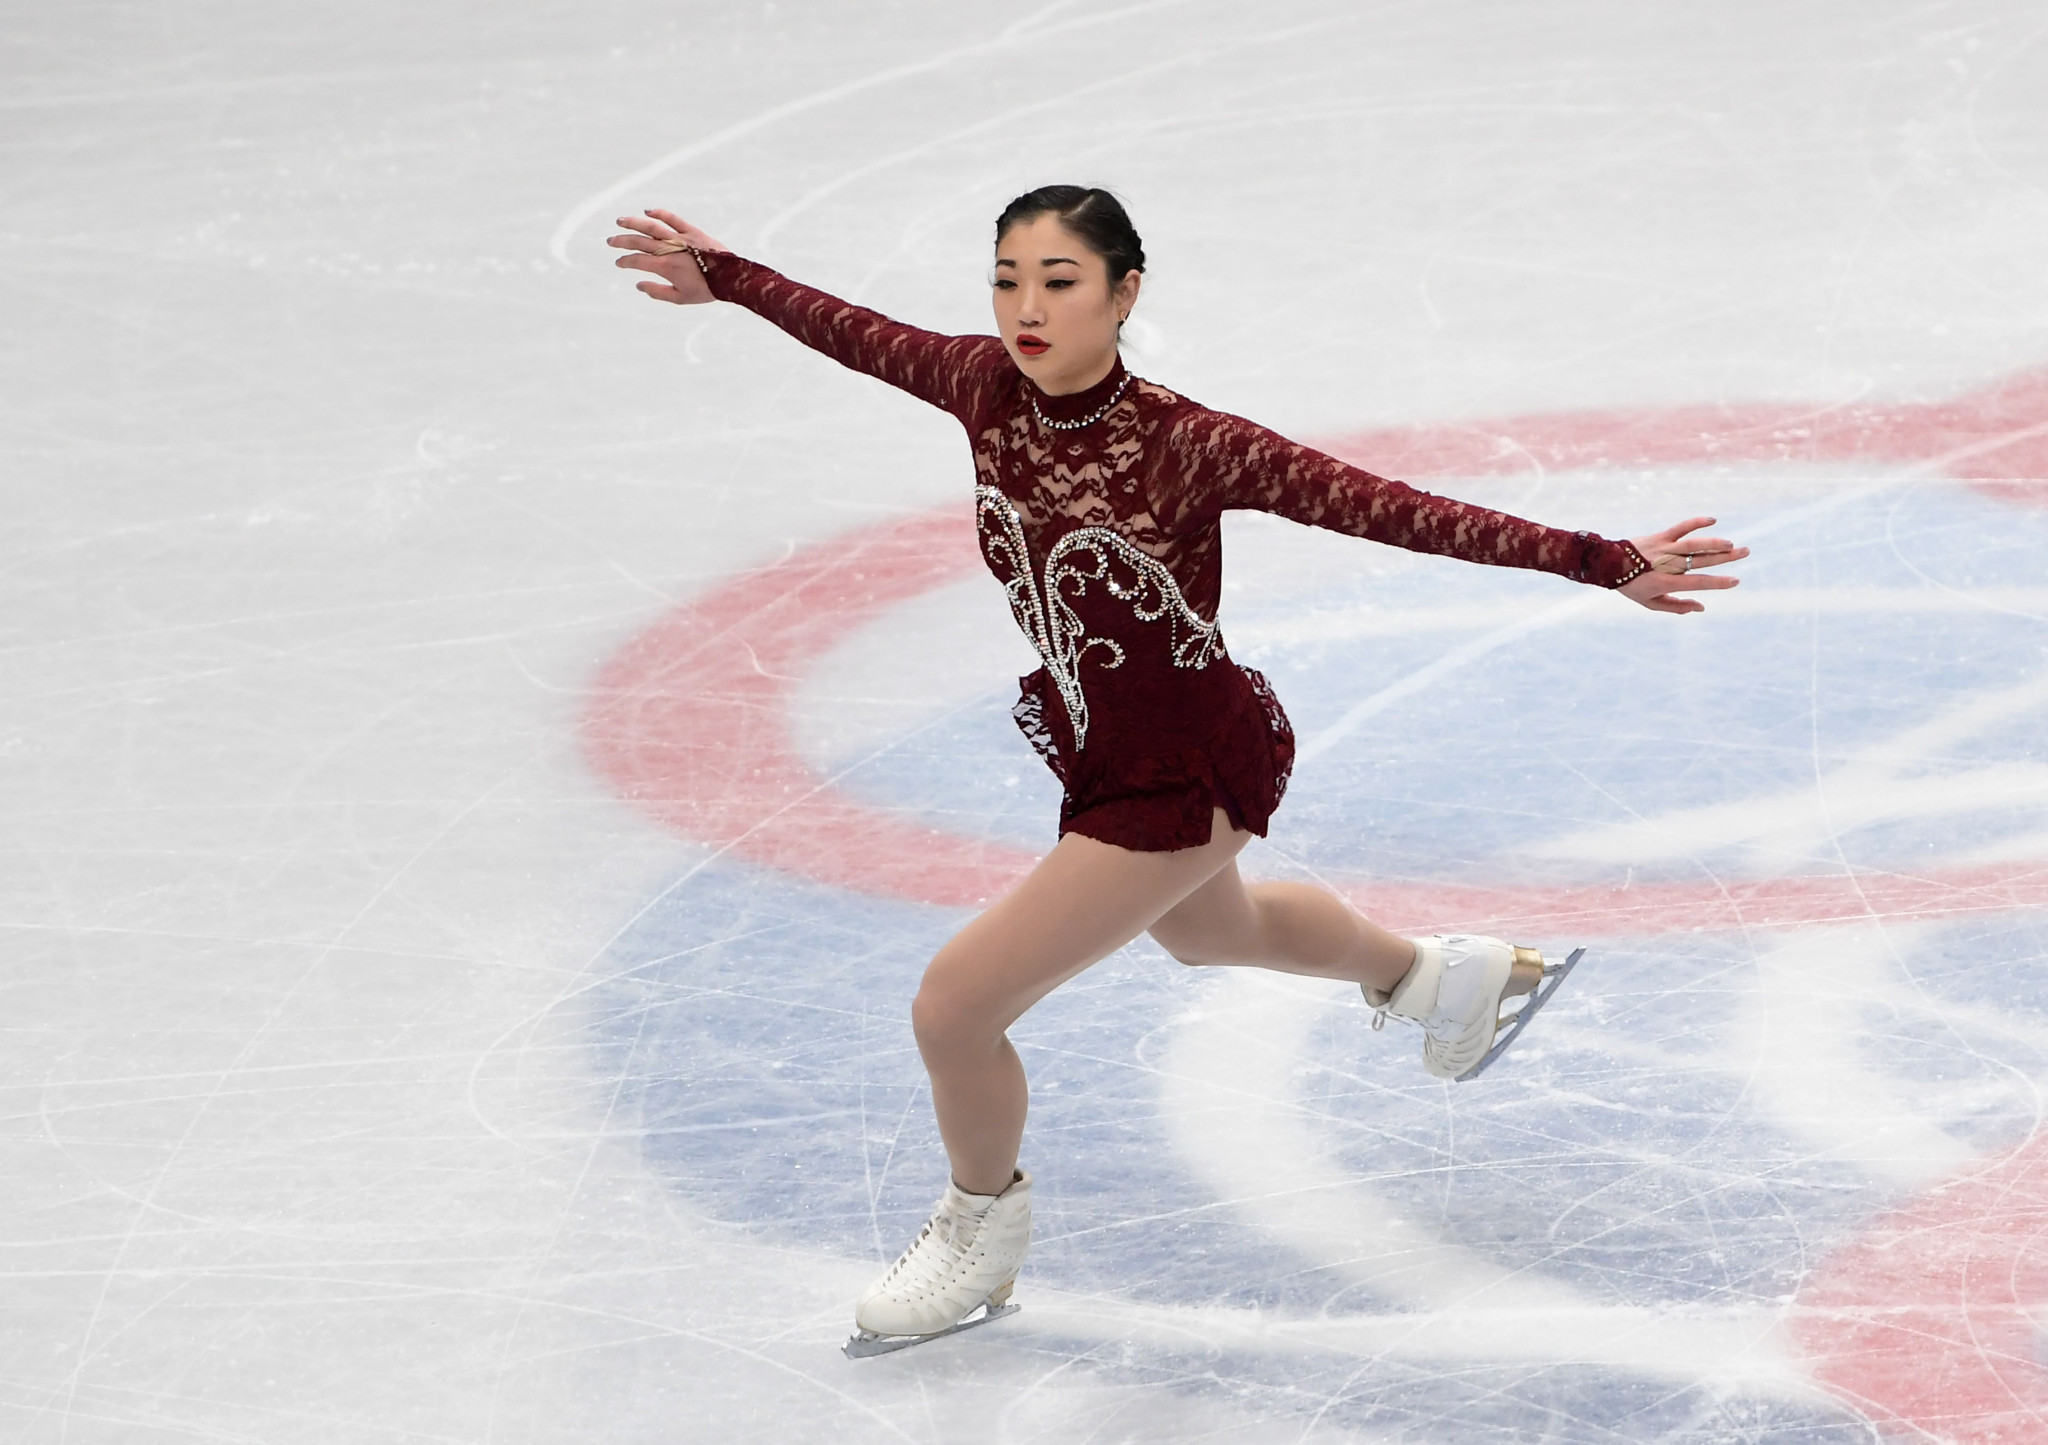 The United States' Mirai Nagasu has announced plans to take an indefinite break from competitive figure skating ©Getty Images